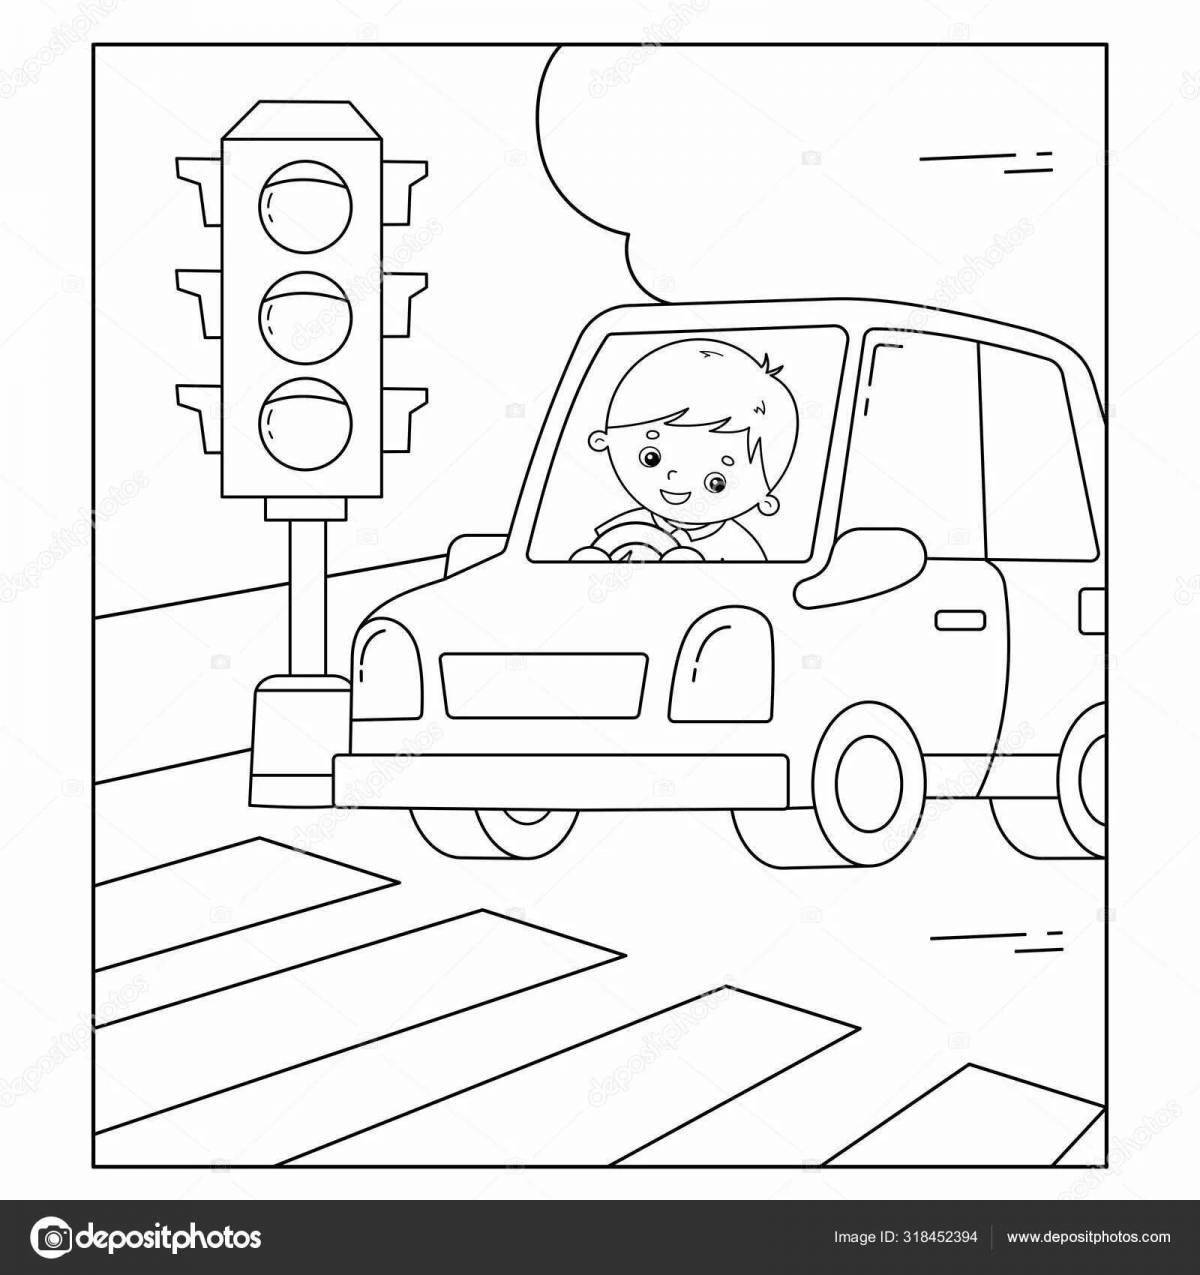 Great road coloring pages for kids